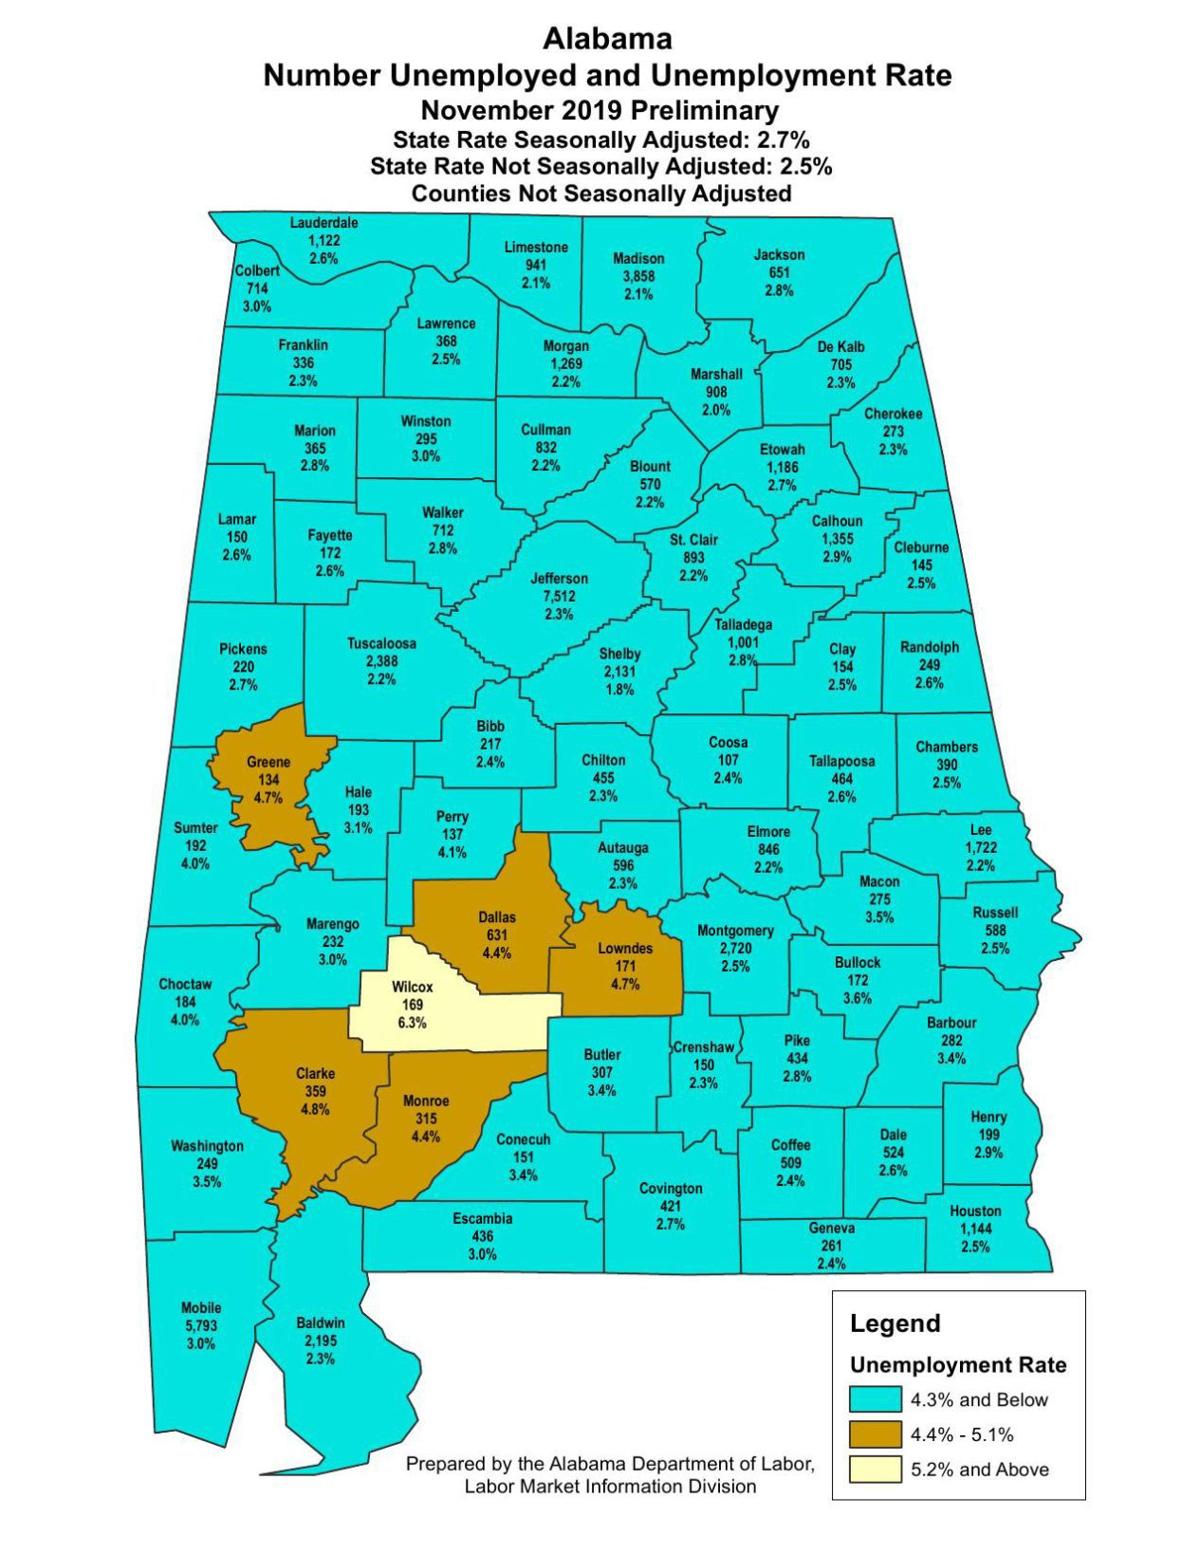 Alabama Number Unemployed and Unemployment Rate November 2019 Preliminary | | timesdaily.com